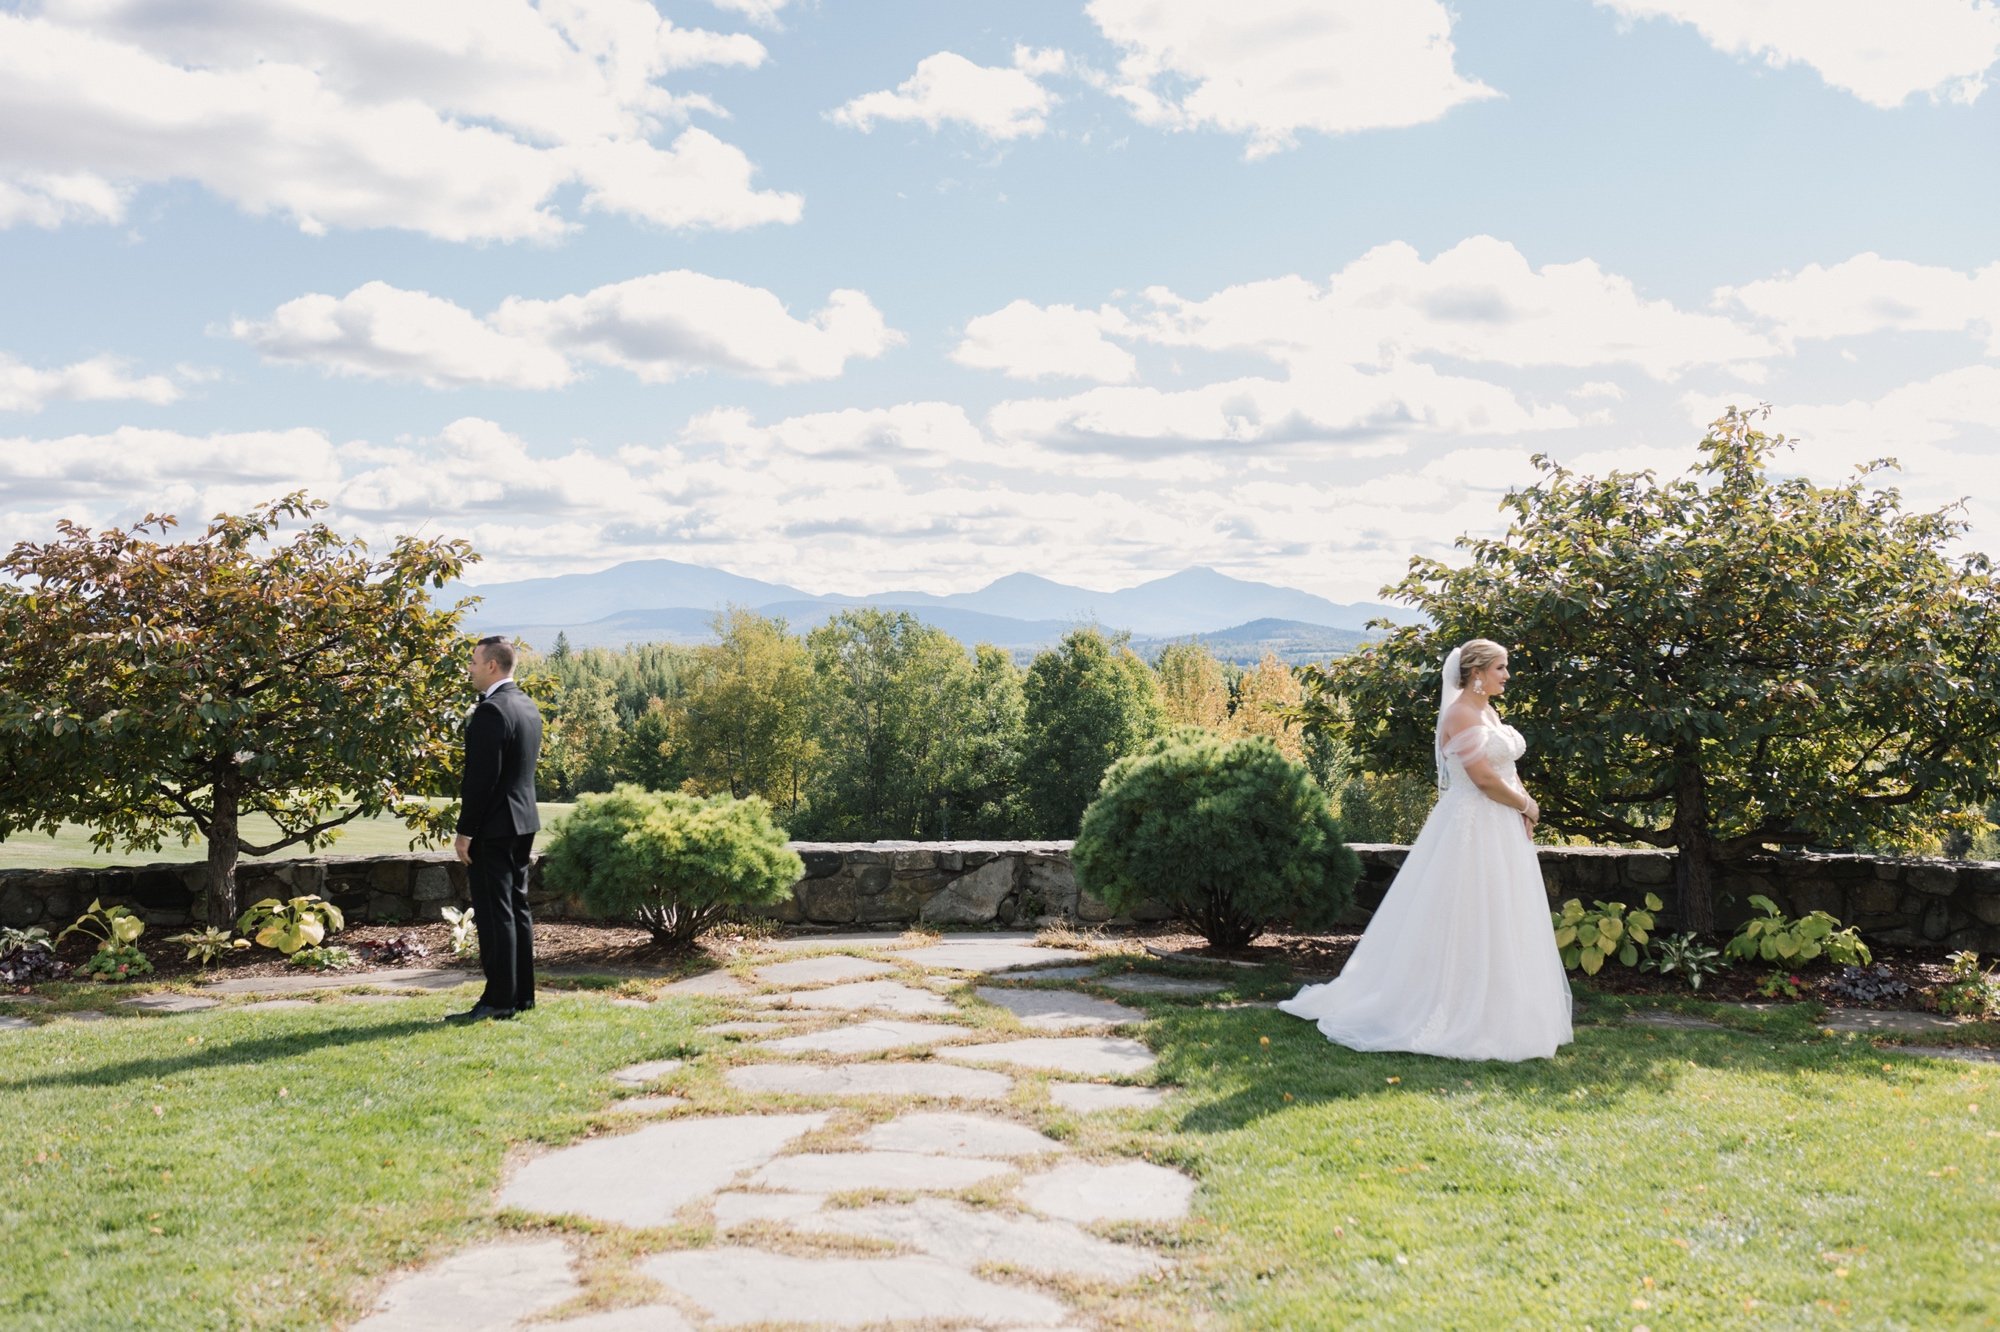 17_whitefield new hampshire NH wedding photography photographer melanie voros blissful events Mountain View Grand Resort and Spa frenchs point washington white mountains MVG.jpg